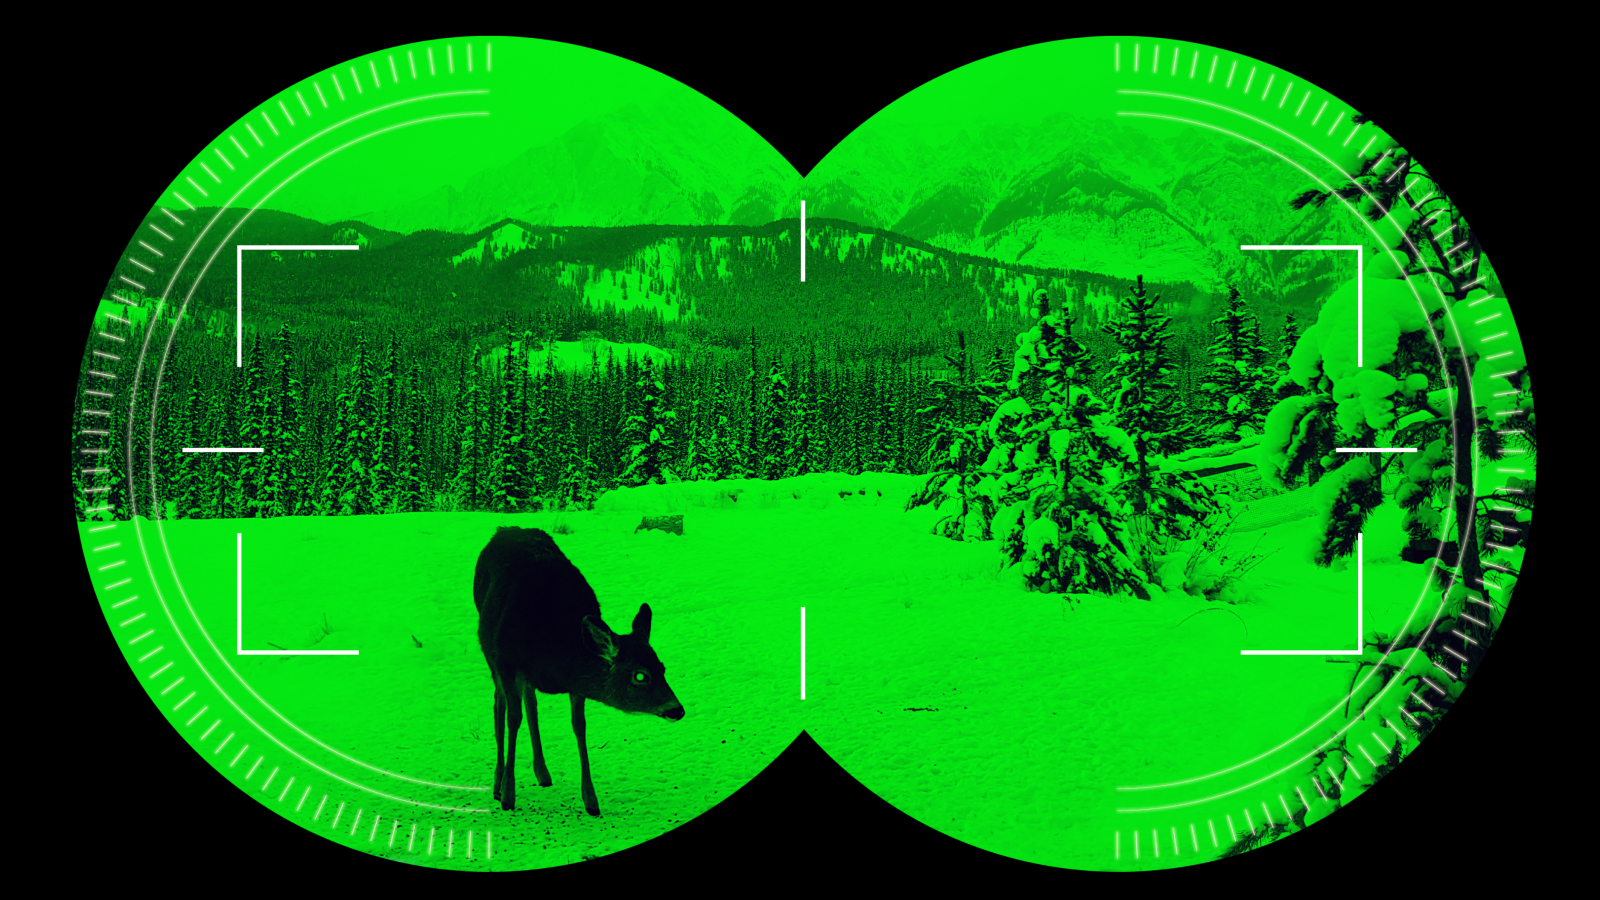  'Night vision lenses' could give you power to see in the dark using simple eyeglasses 